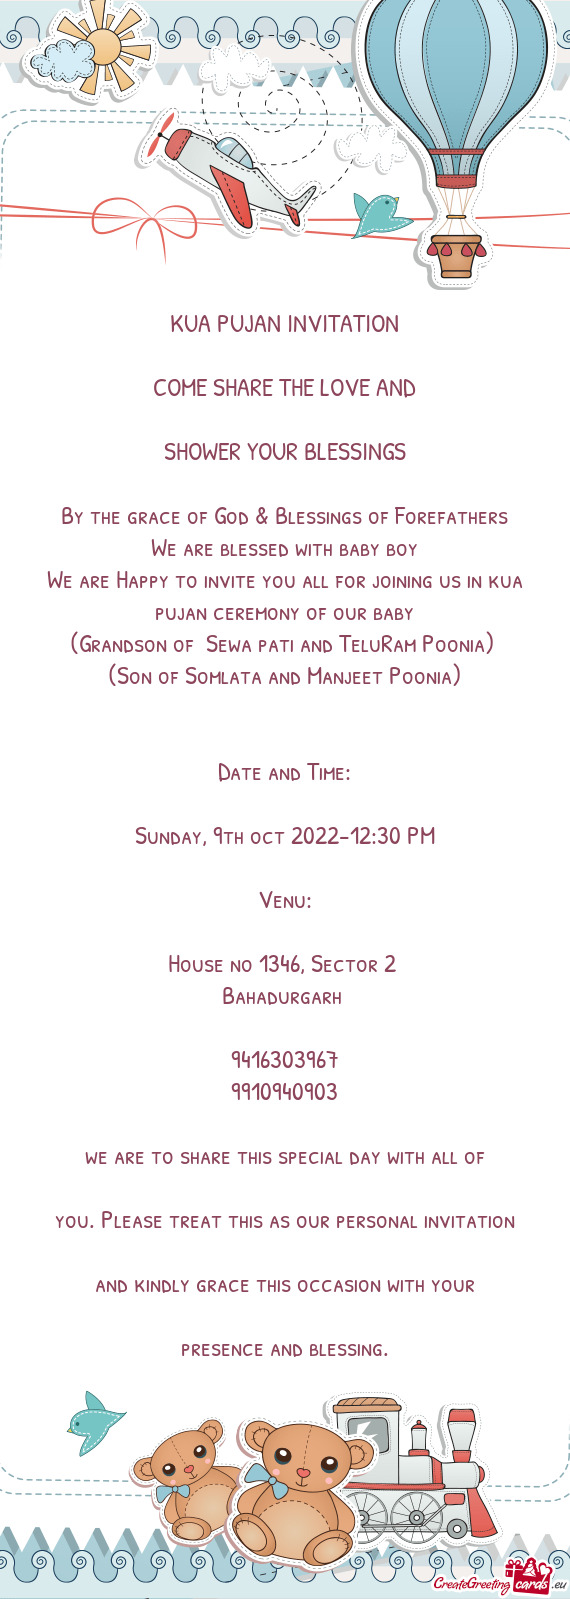 We are Happy to invite you all for joining us in kua pujan ceremony of our baby